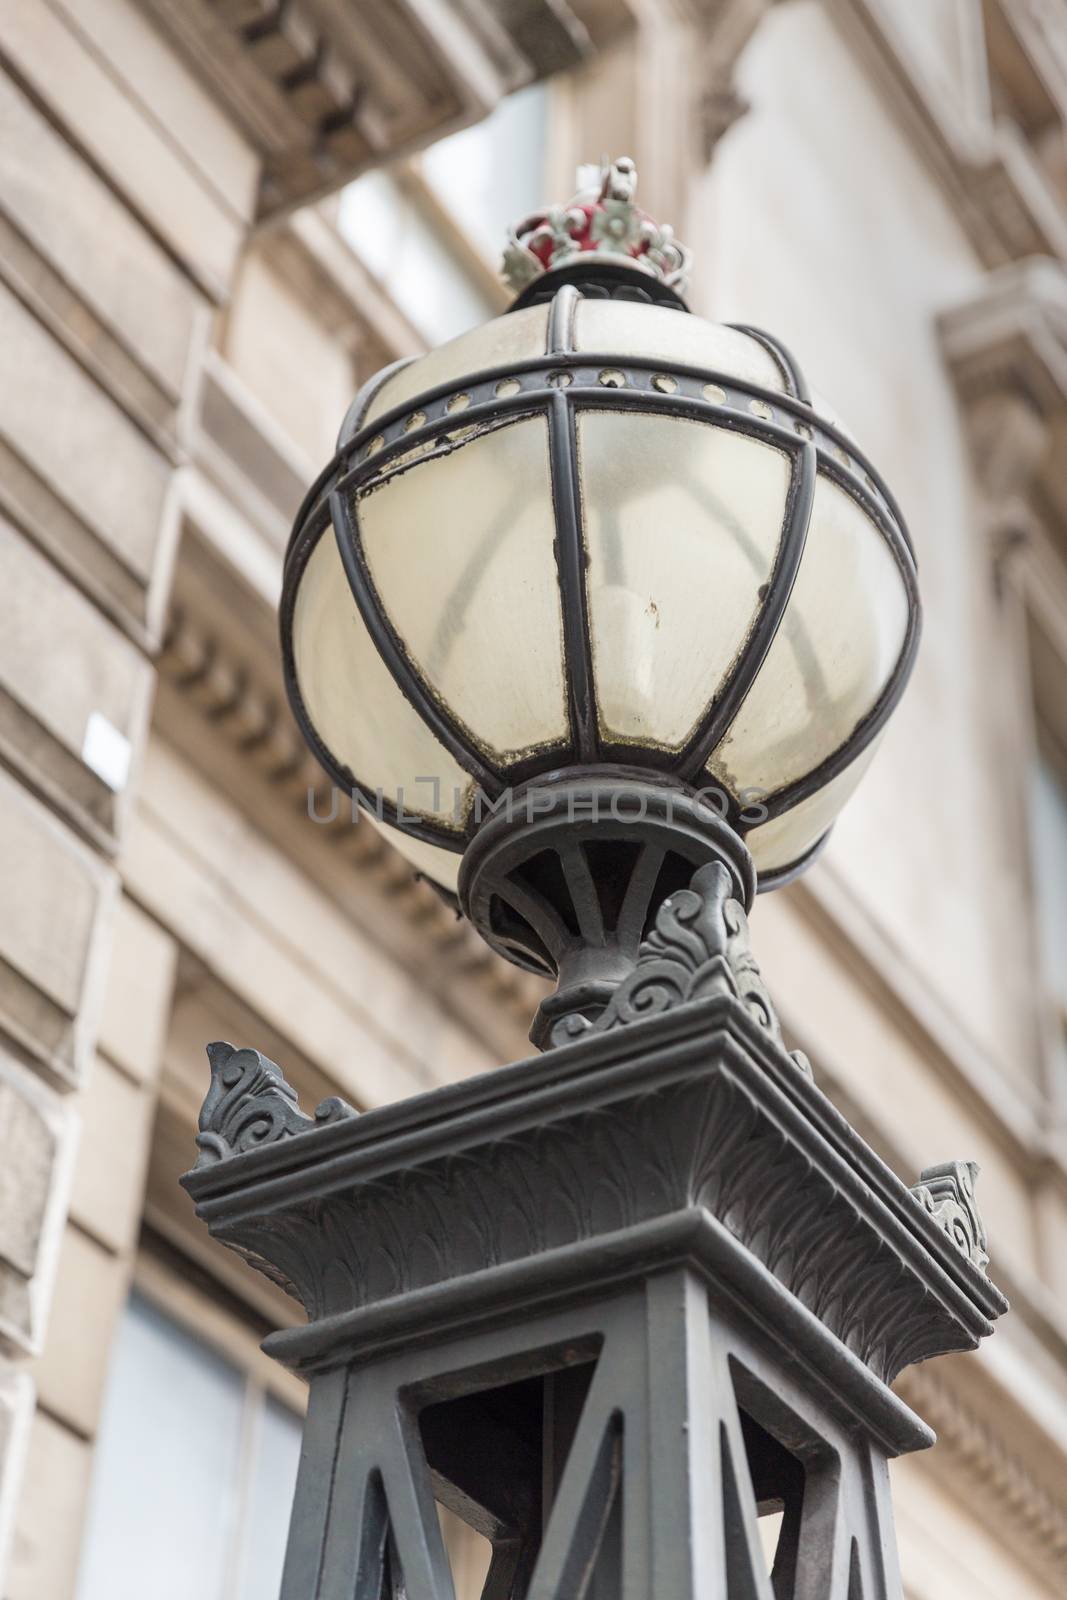 Original Gas Lamp in London by chrisukphoto